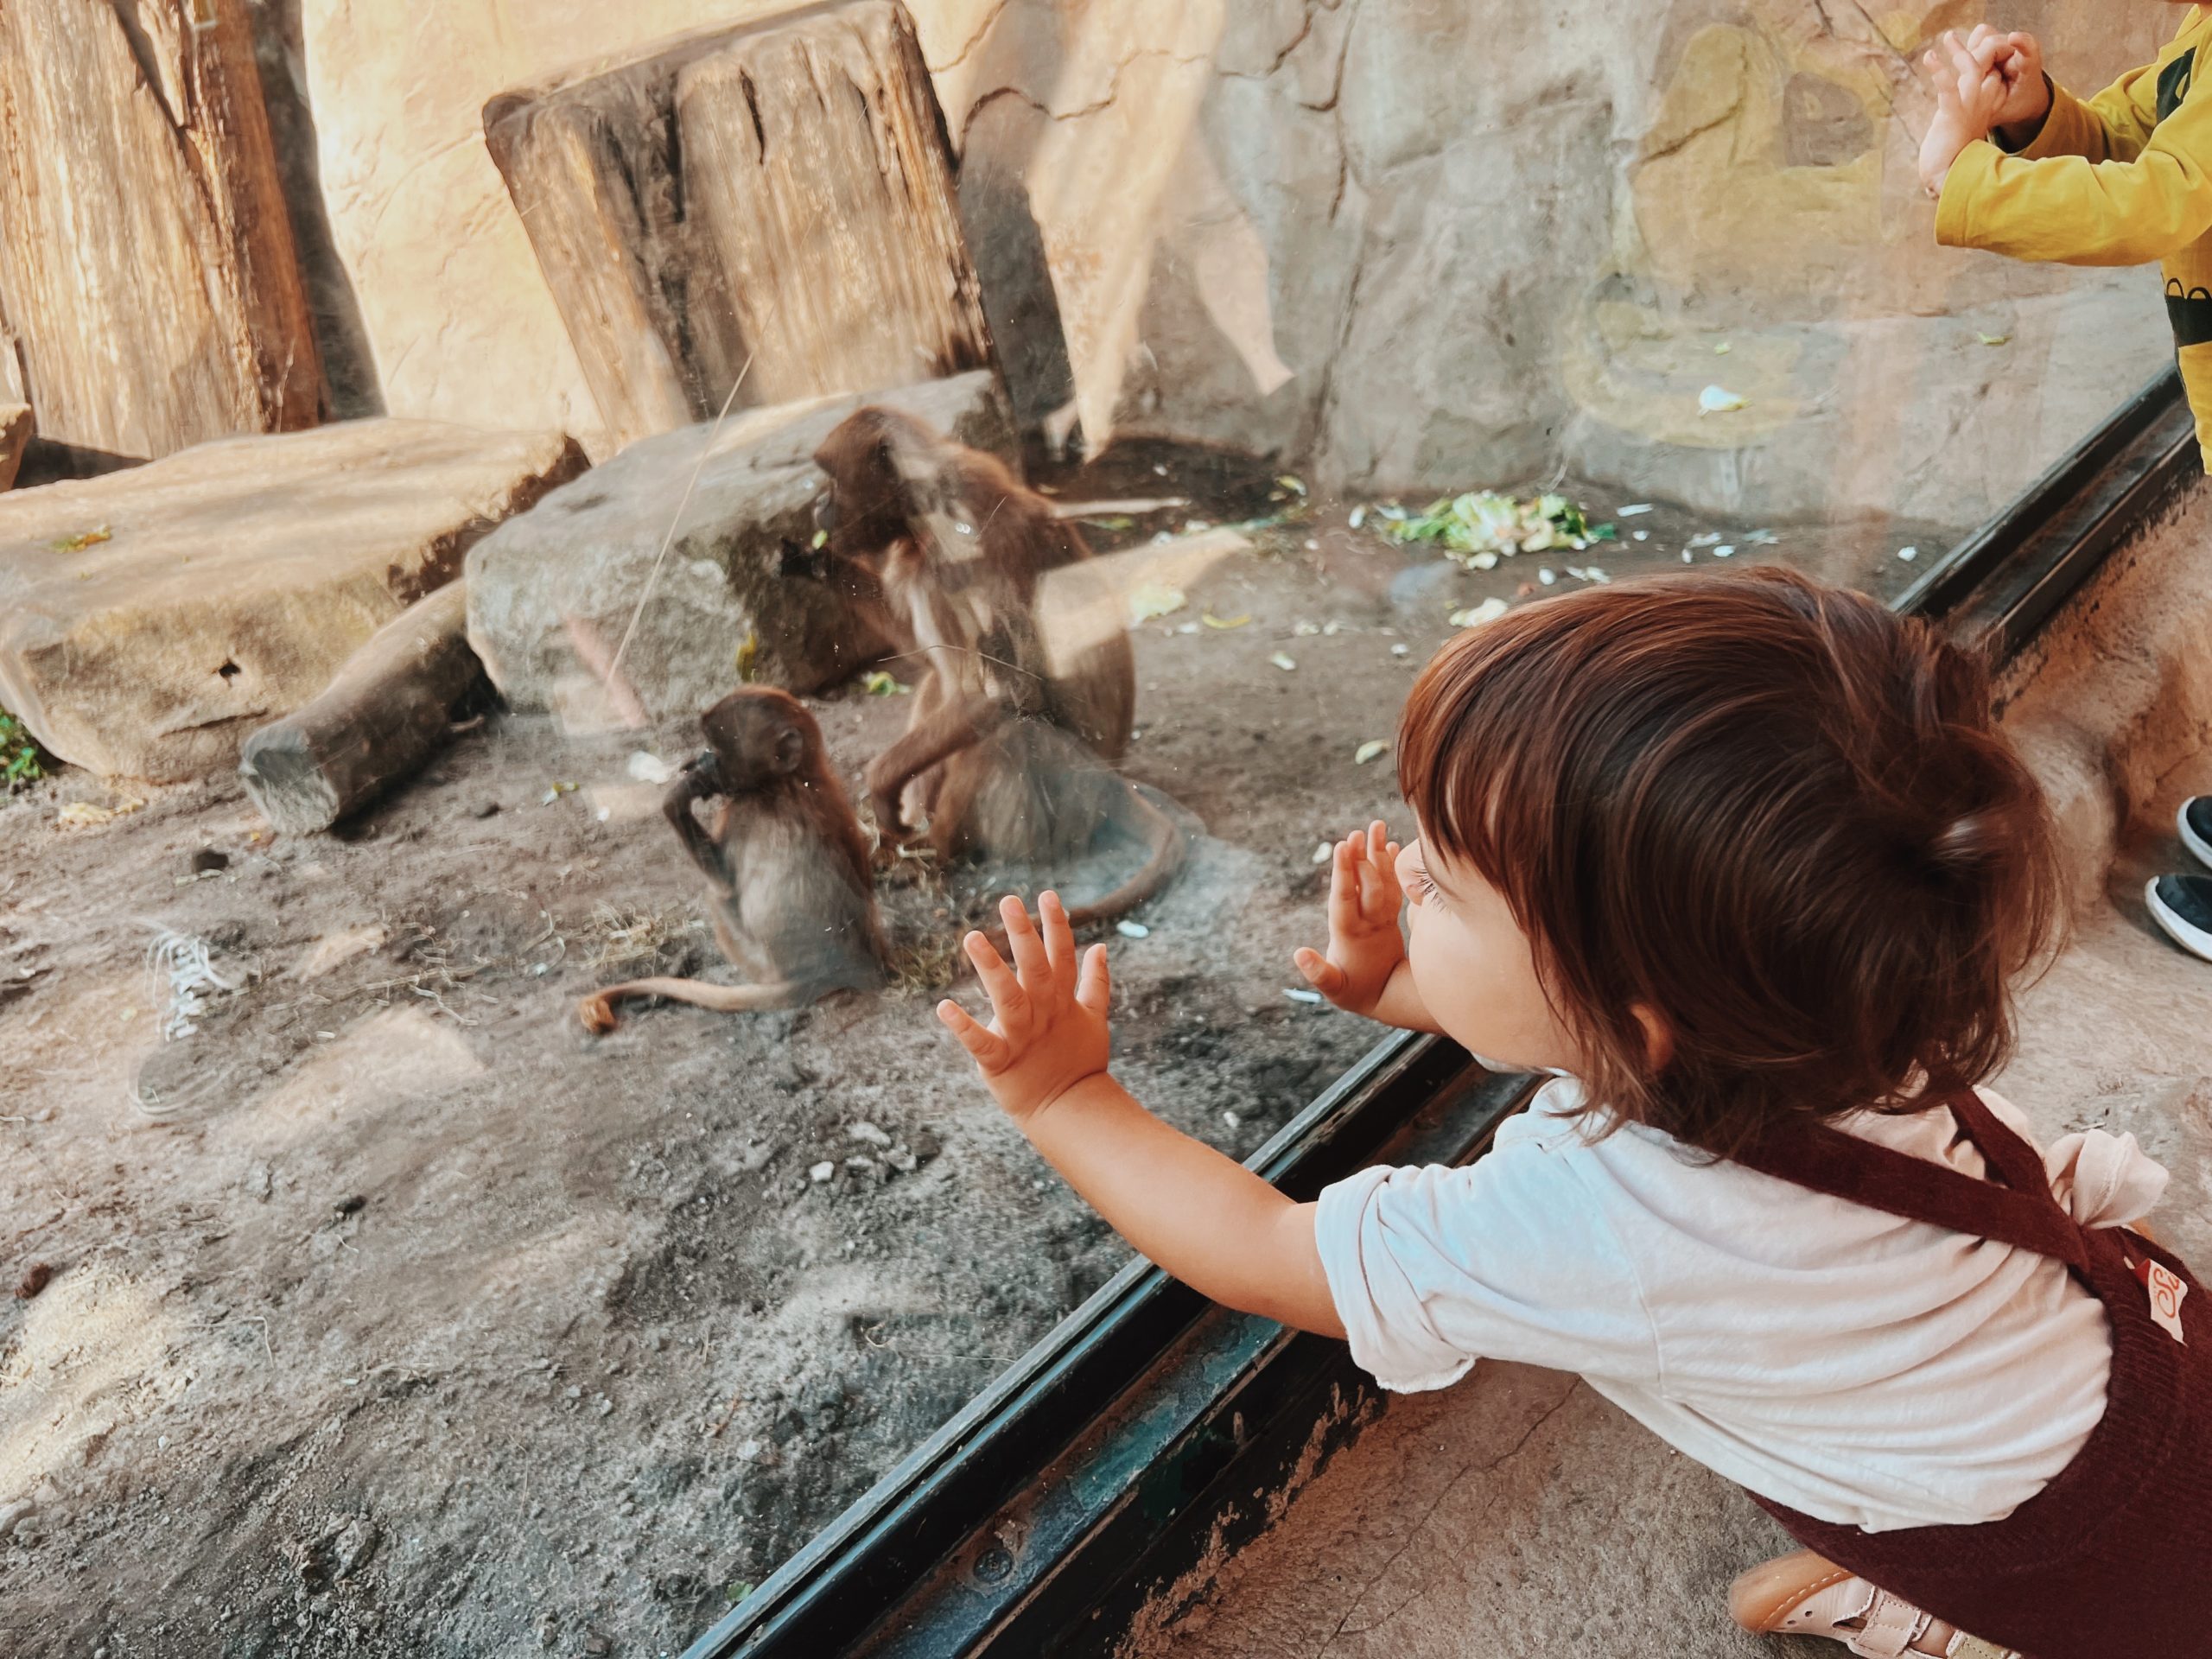 Tierpark Berlin: A Perfect Day Out for Families